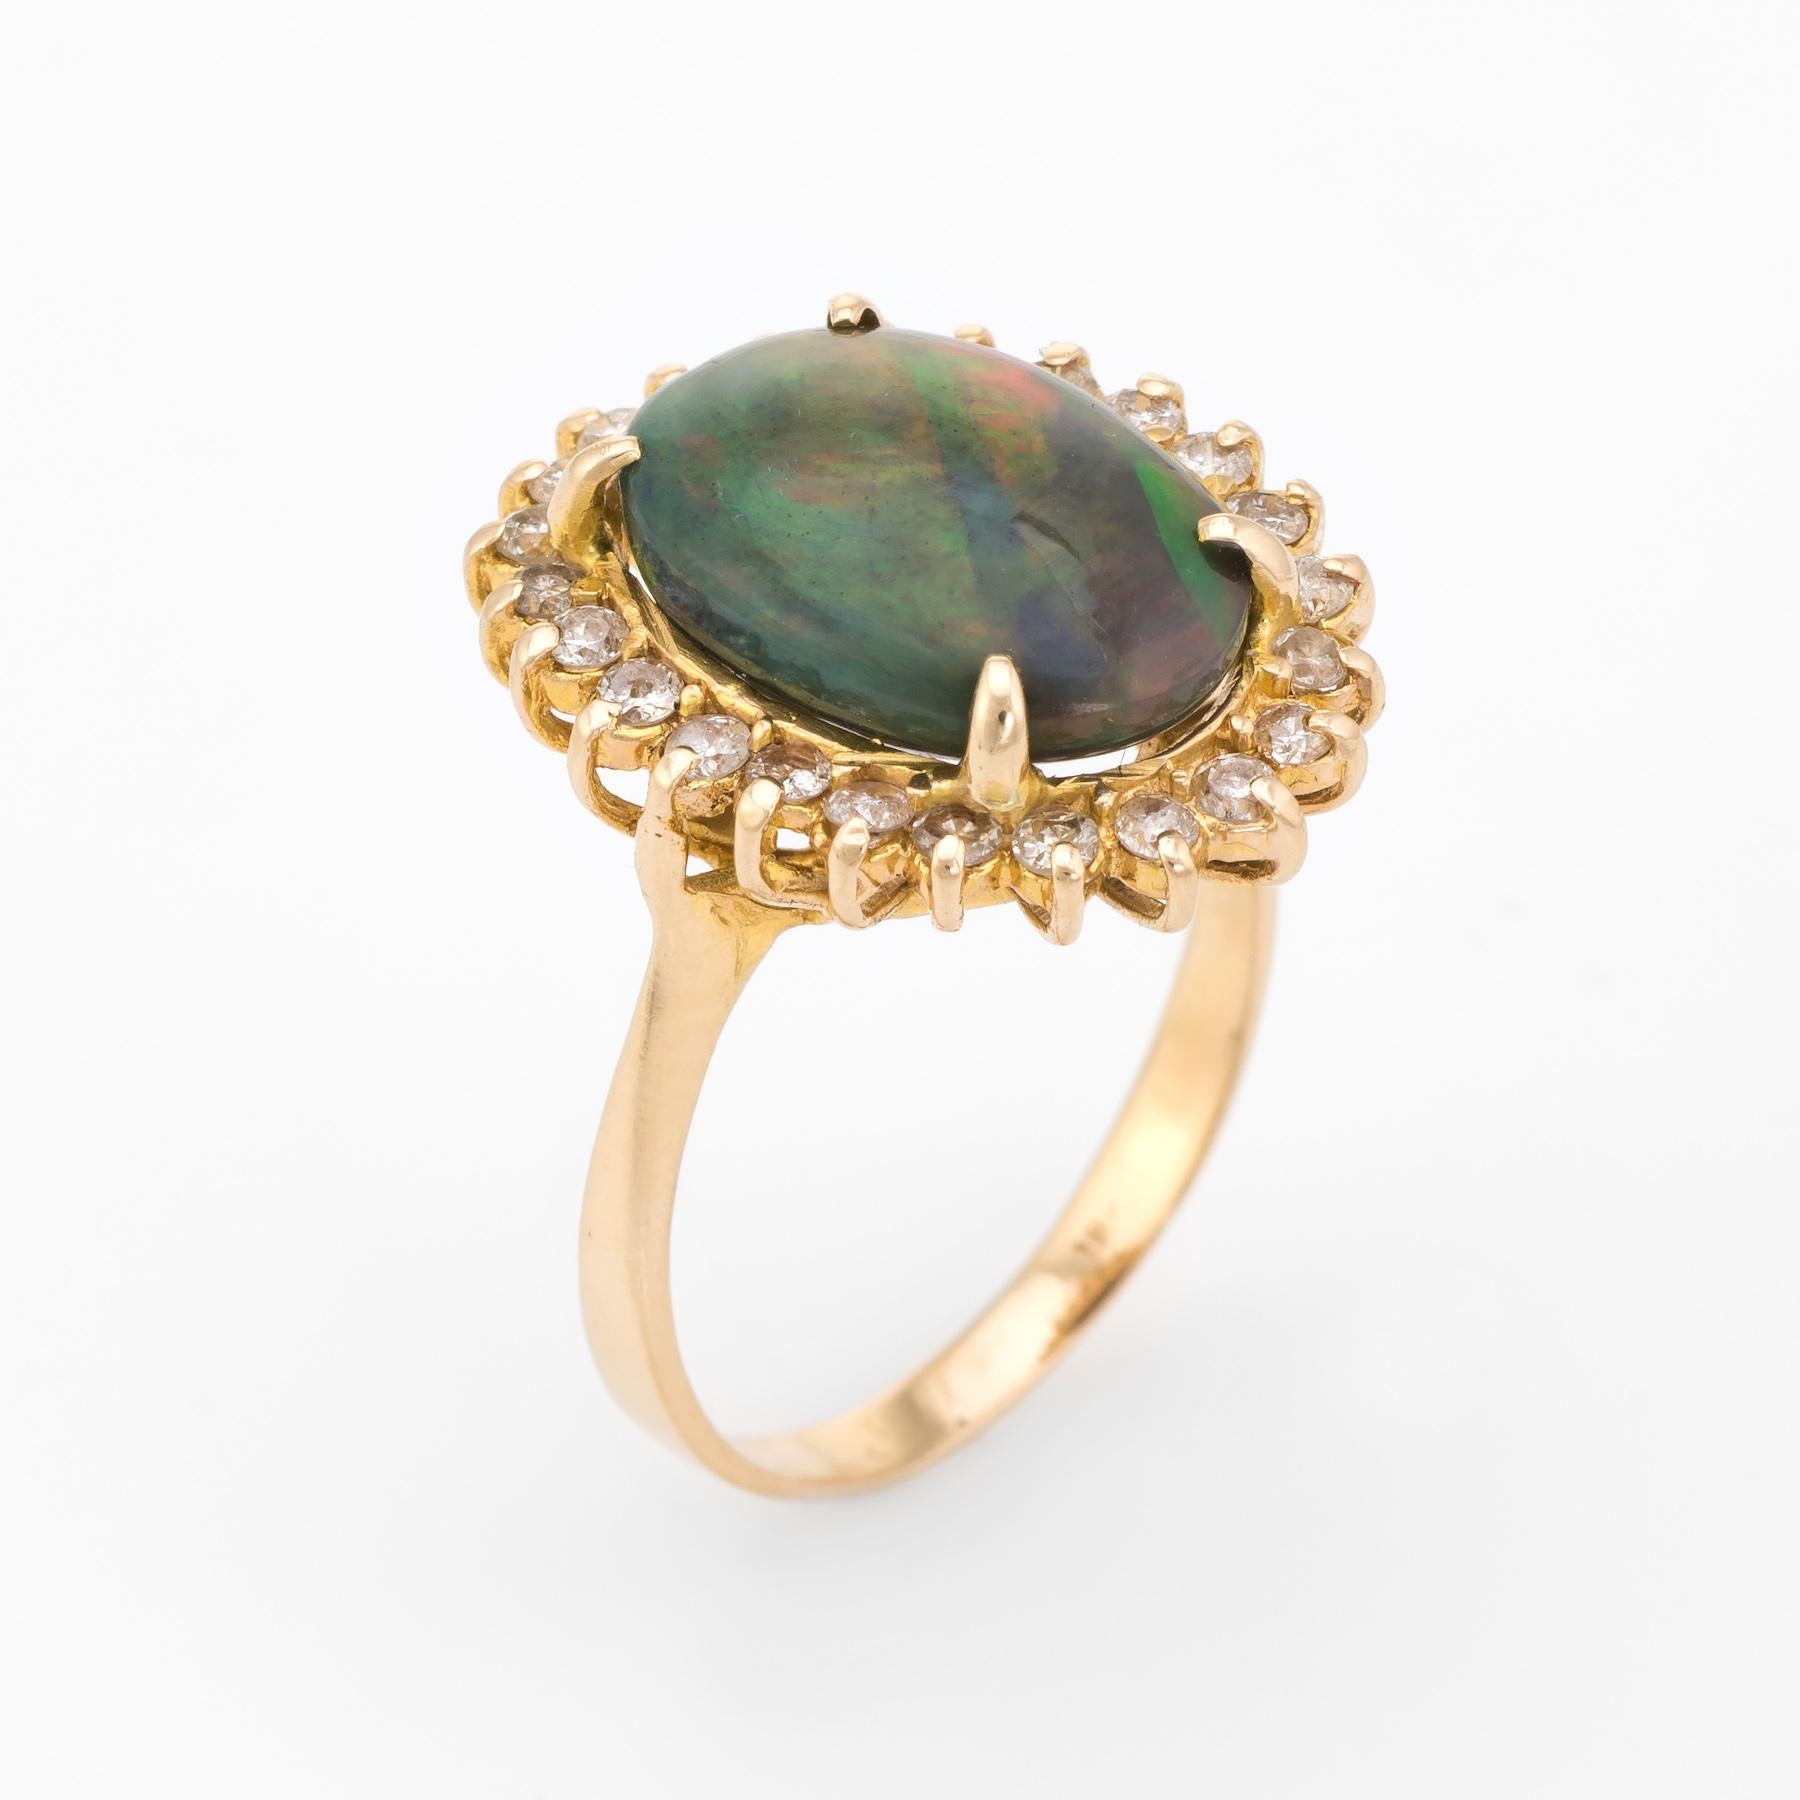 Finely detailed vintage natural black opal & diamond cocktail ring, crafted in 18 karat yellow gold. 

Centrally mounted oval cabochon cut natural black opal, approx. 4.75ct (14.75 x 10.25 x 5.40mm), with a distinct orange/yellow/green/blue